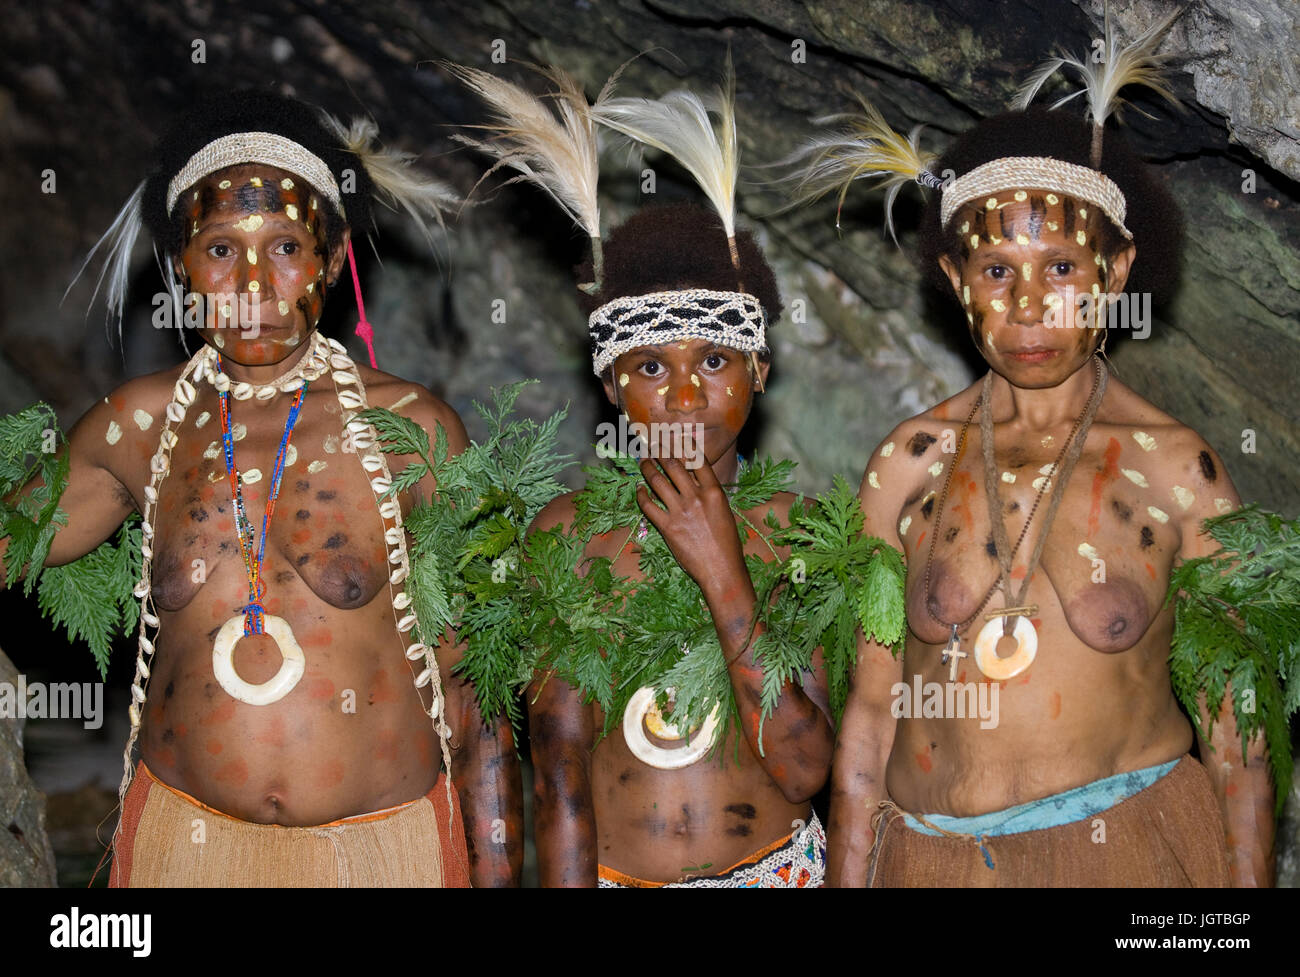 NEW GUINEA, INDONESIA - 13 JANUARY: Women Yaffi tribe in traditional coloring. Stock Photo